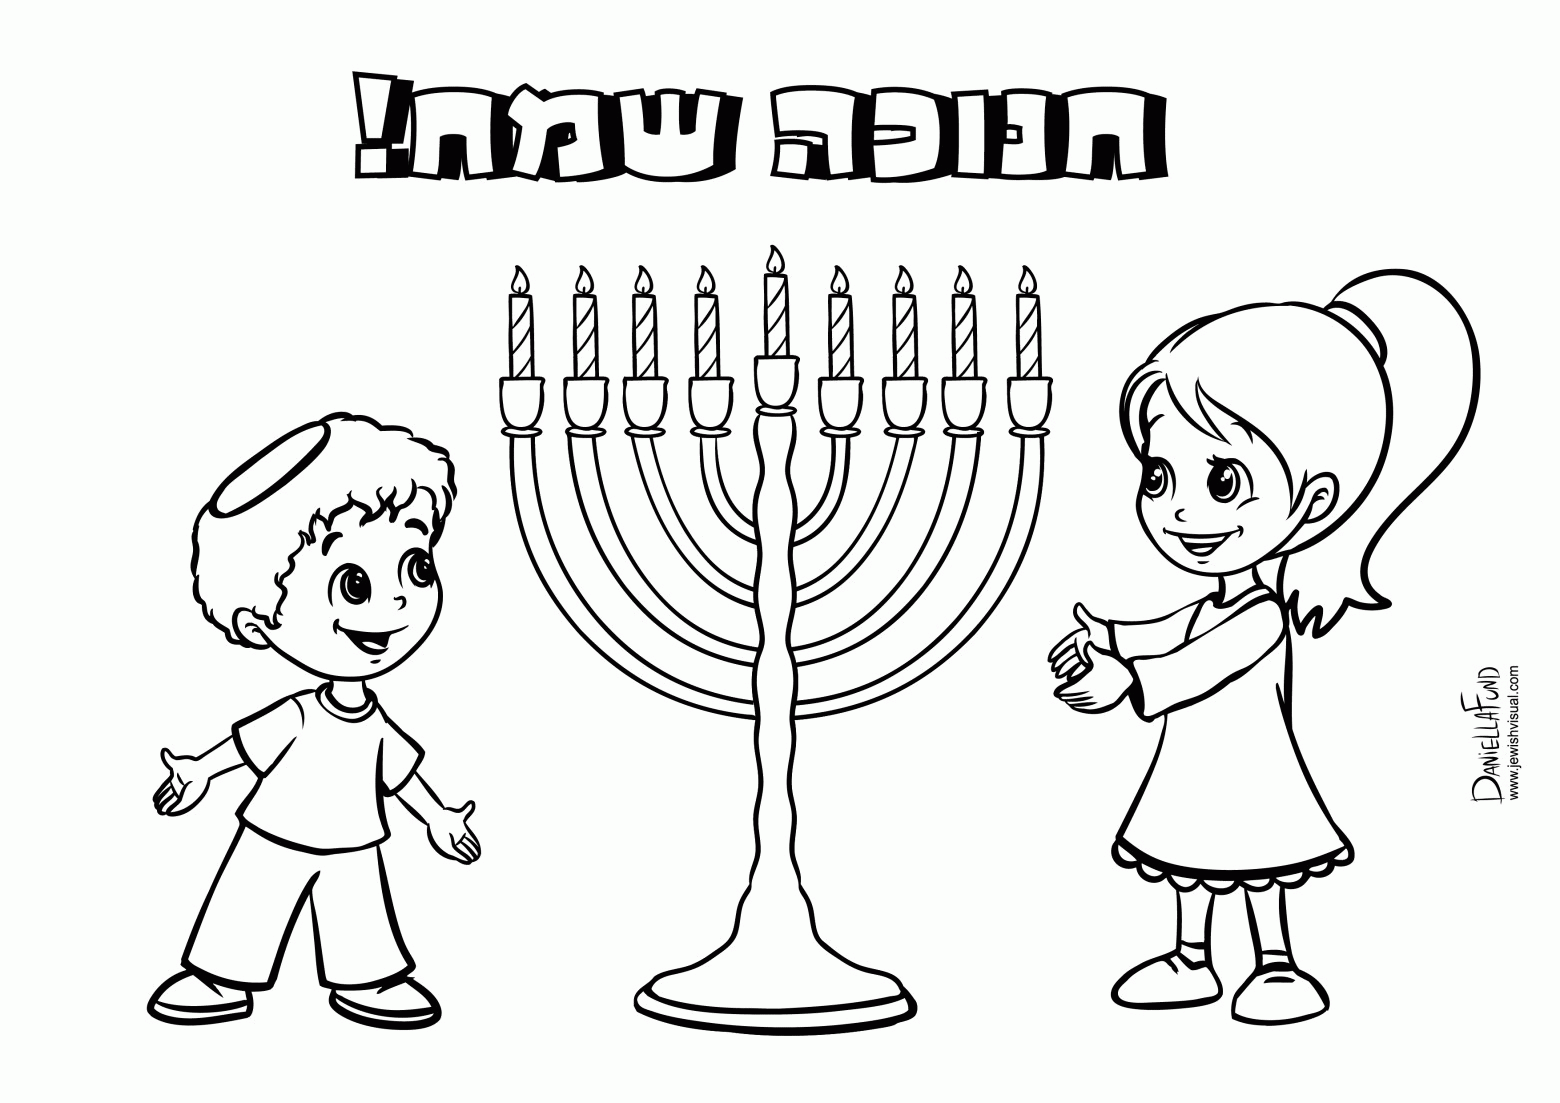 Hanukkah Coloring Pages Hanukkah Coloring Page Hanukkah Coloring ...